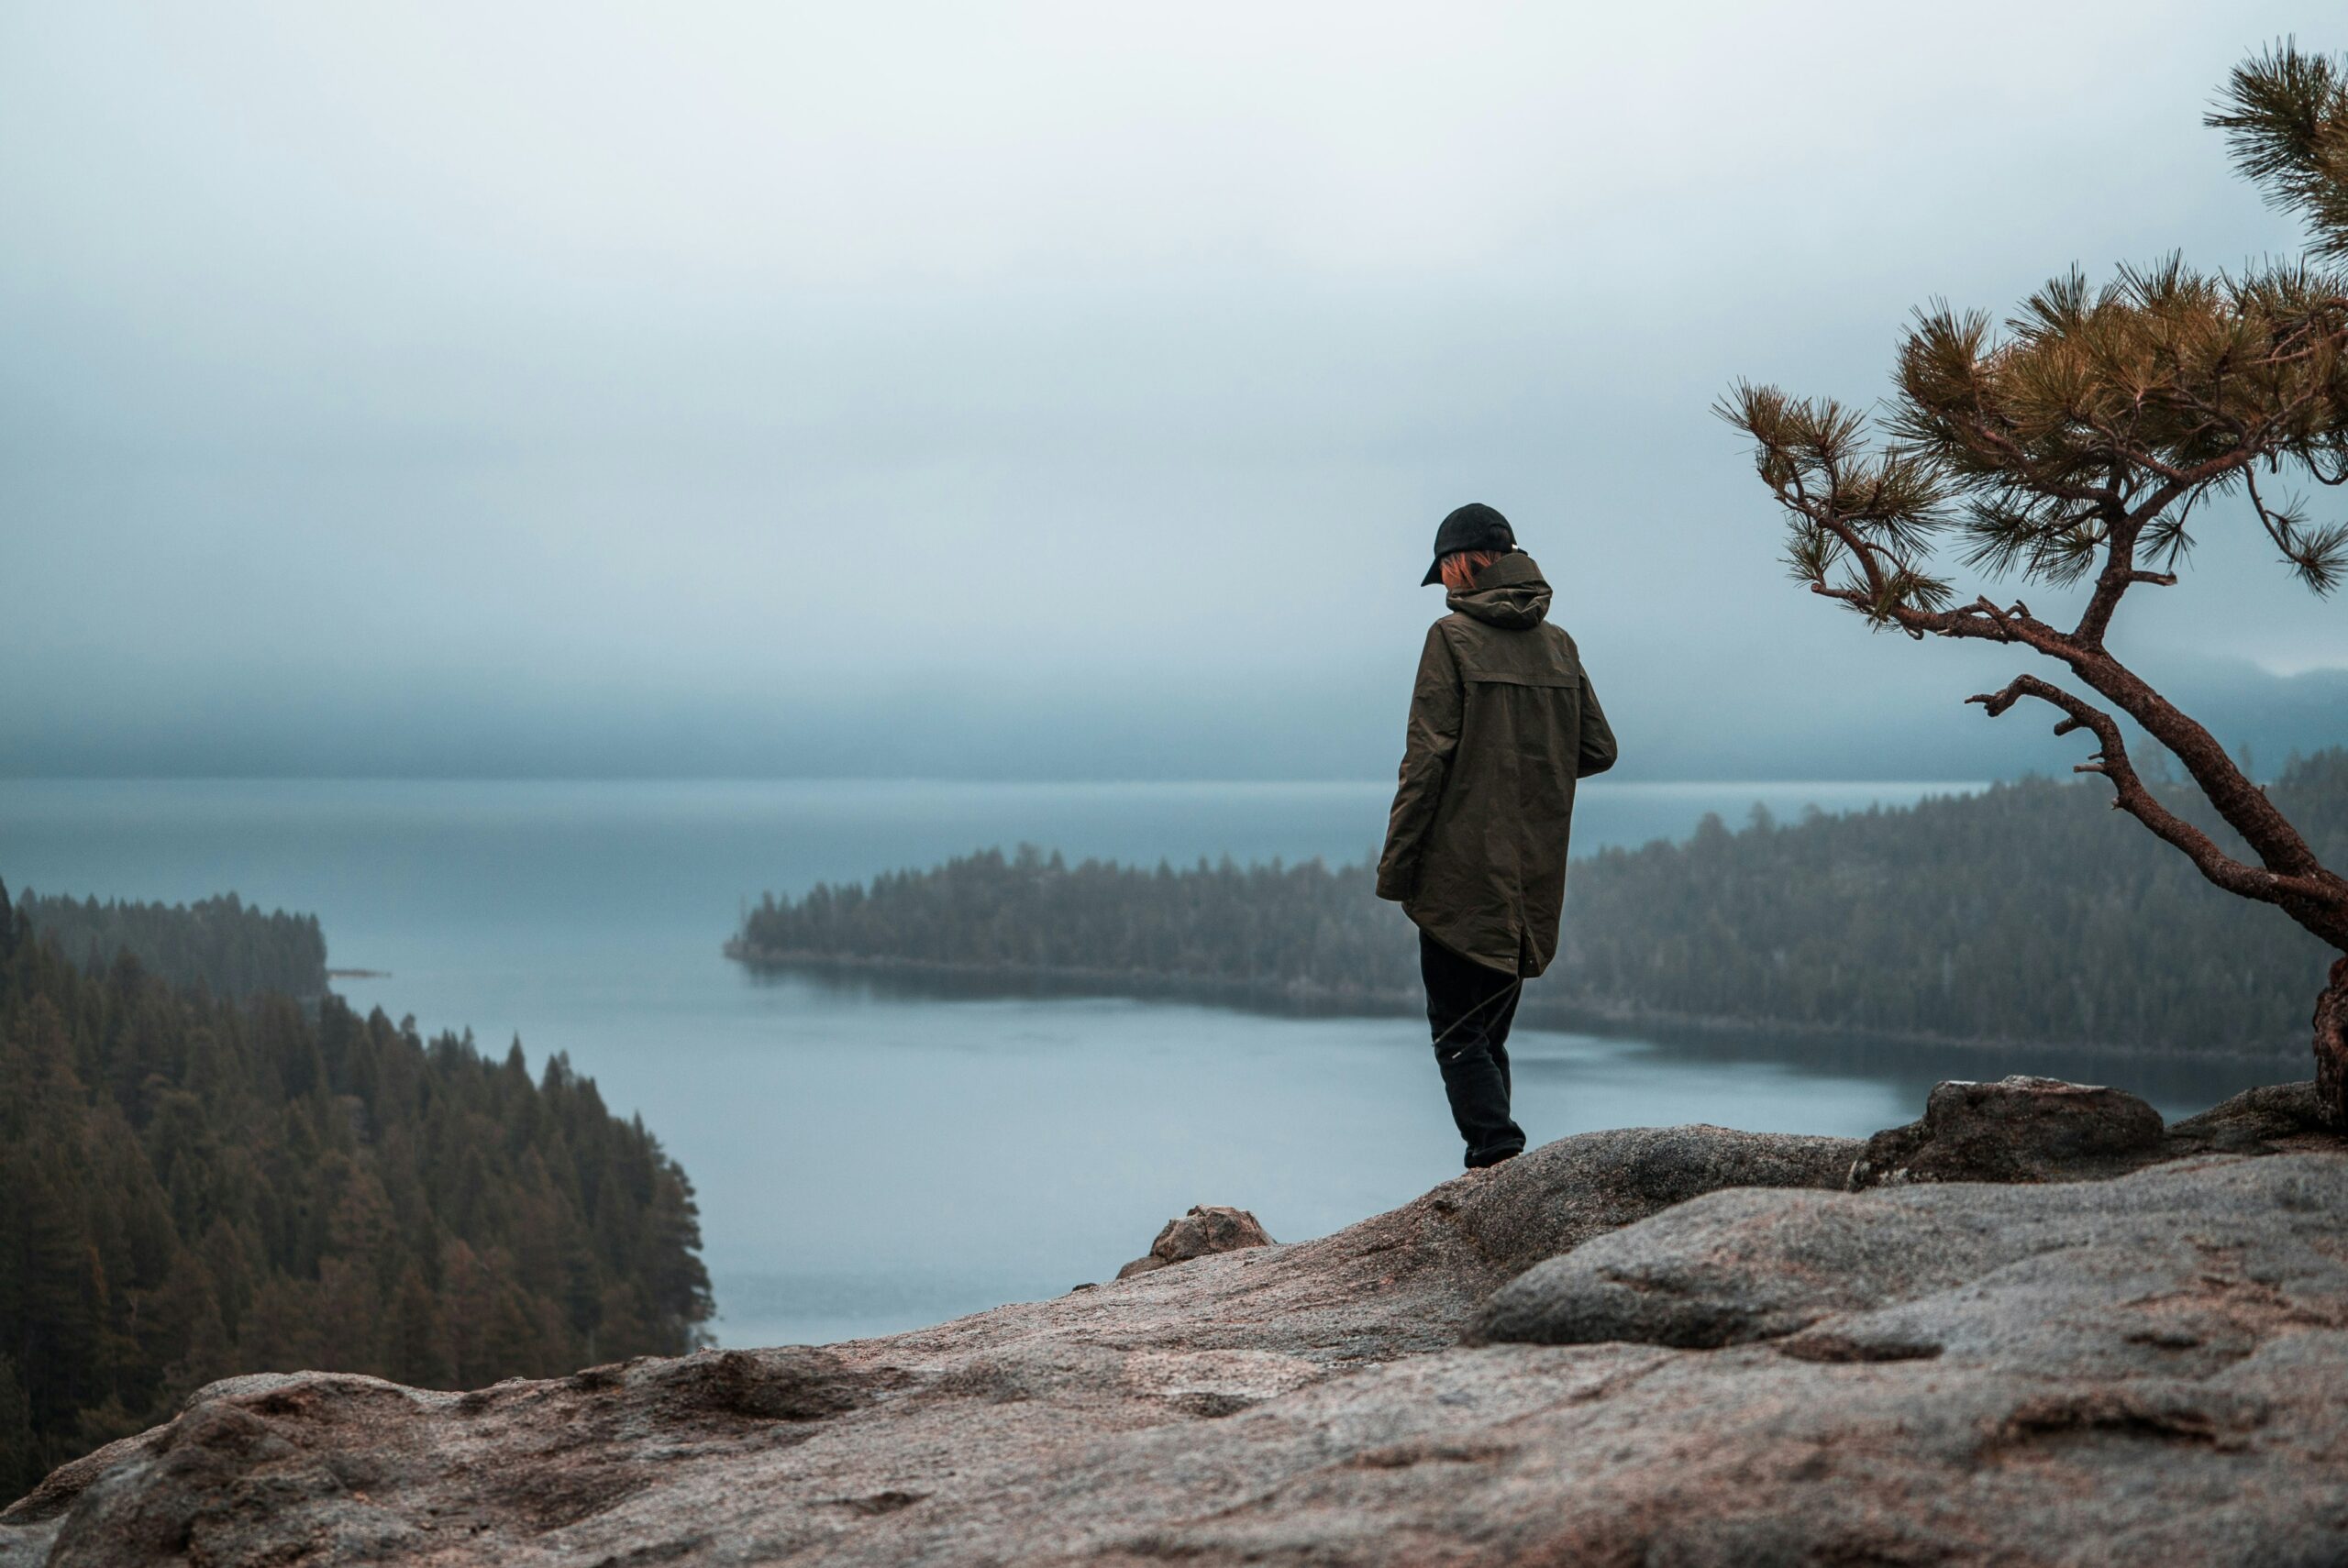 a person in a jacket and hat is standing at the edge of a cliff overlooking Emerald Bay on a foggy day